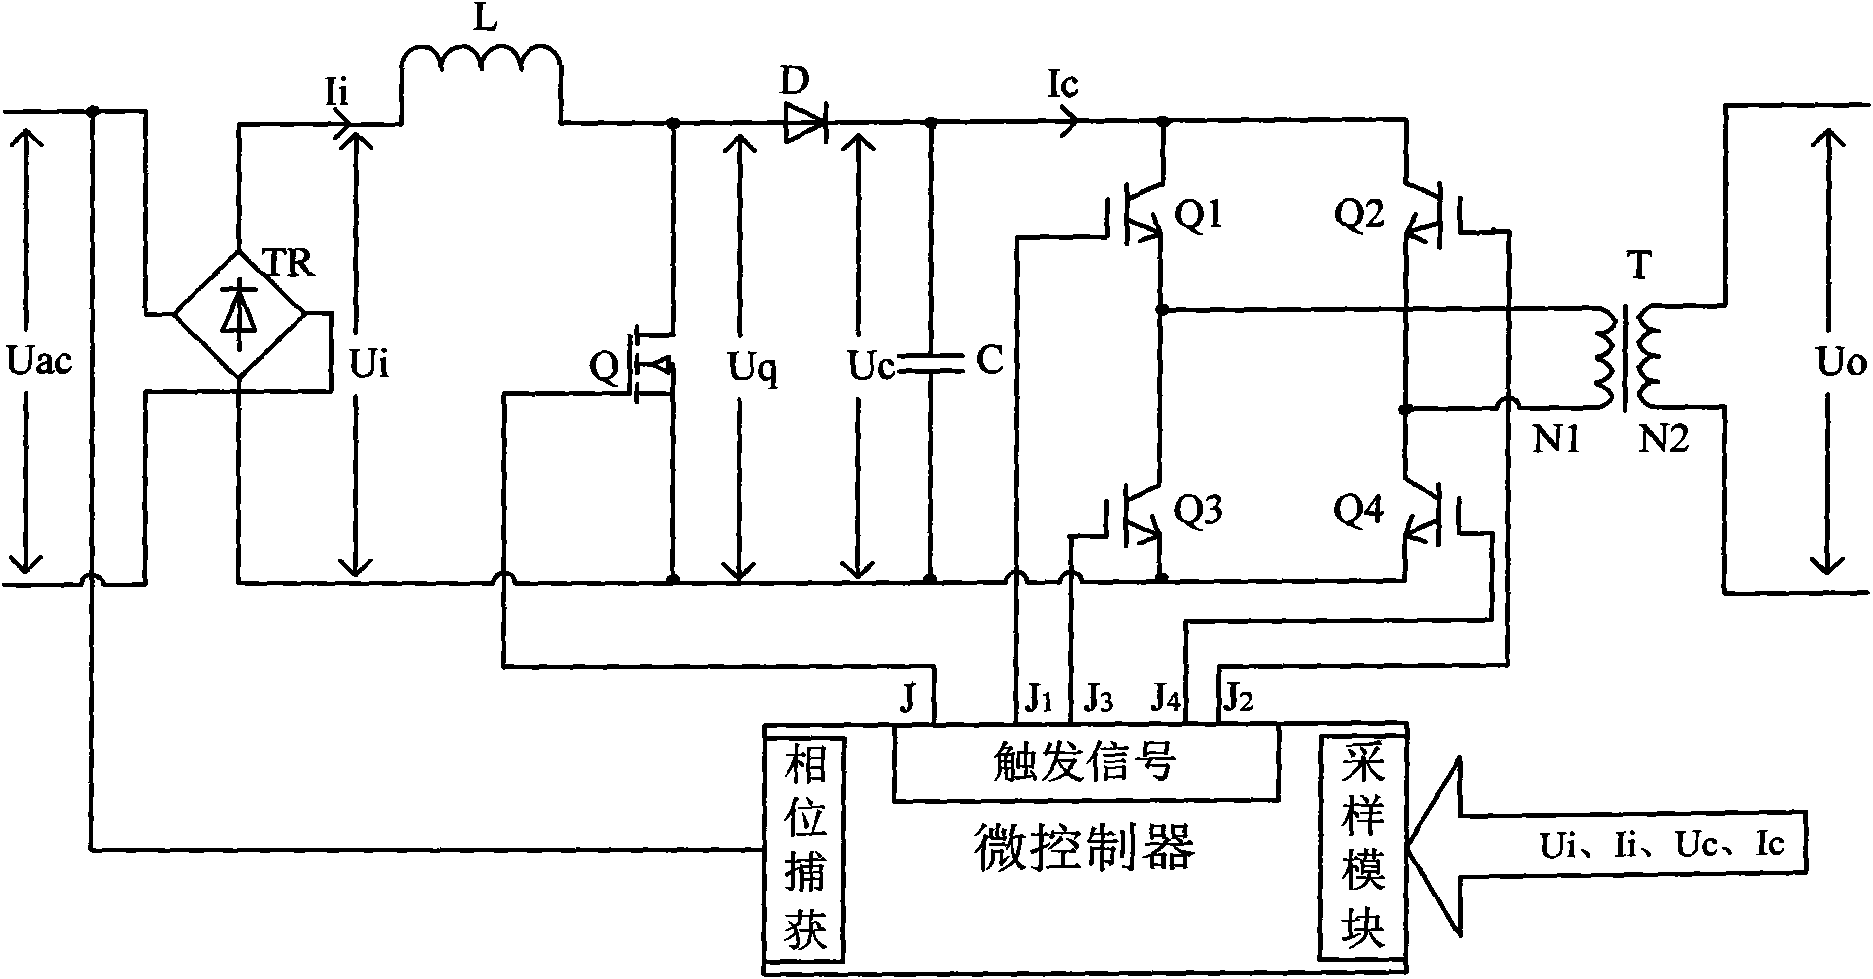 High-efficiency power regulating device based on power factor correction